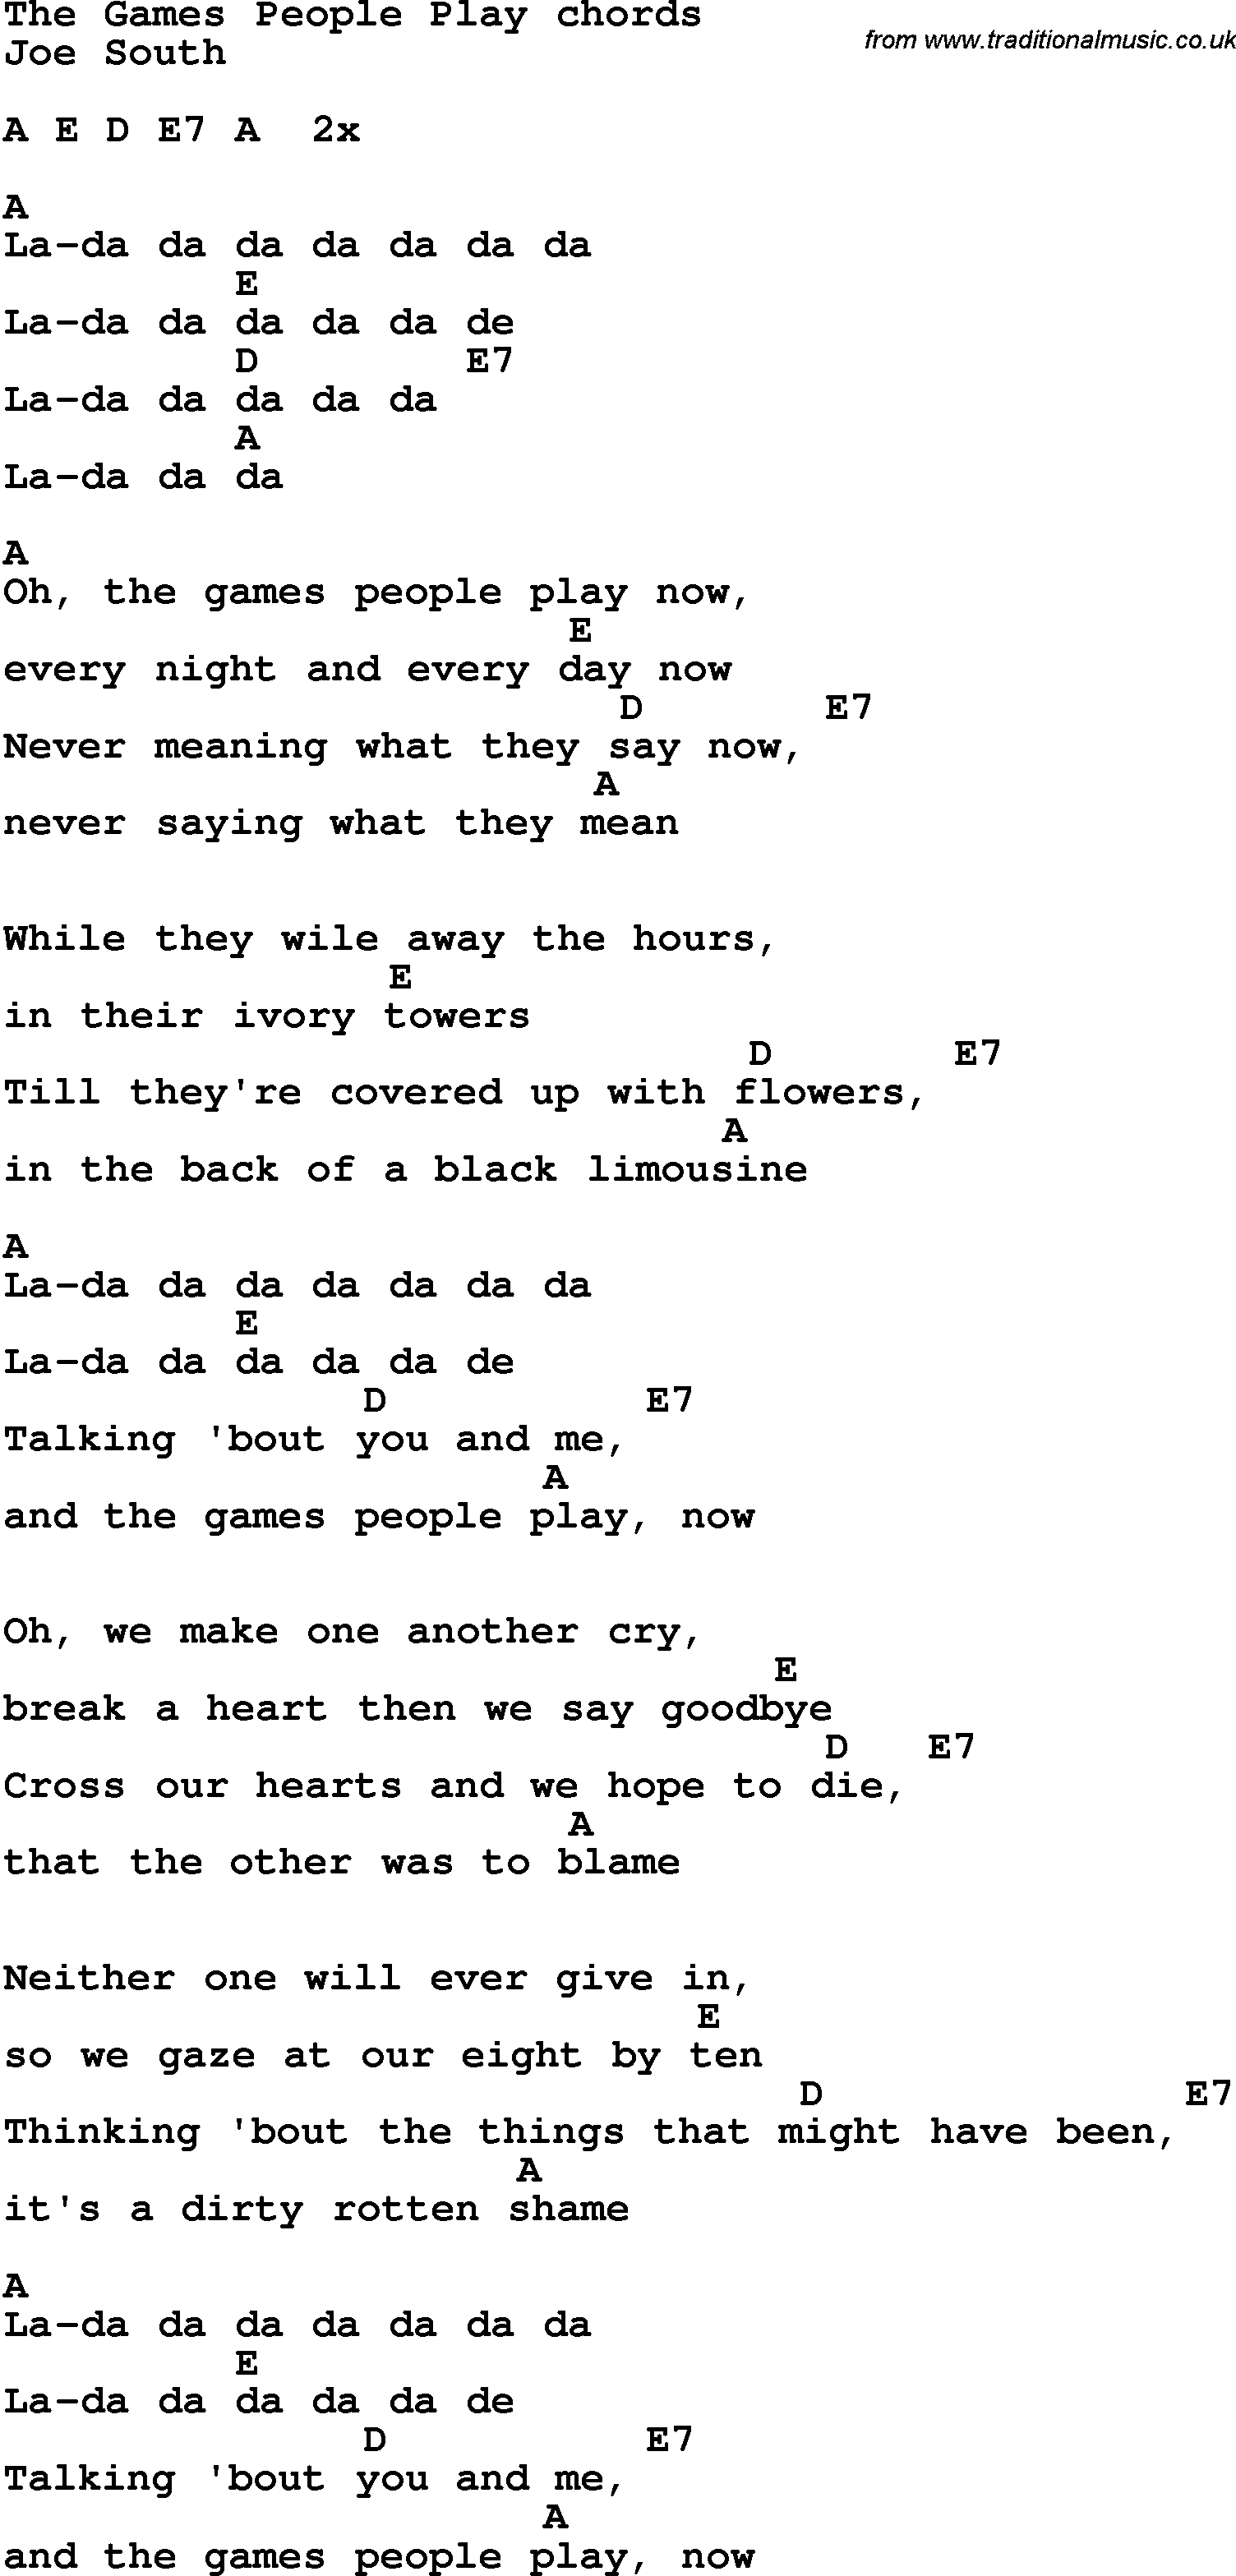 Song Lyrics with guitar chords for The Games People Play